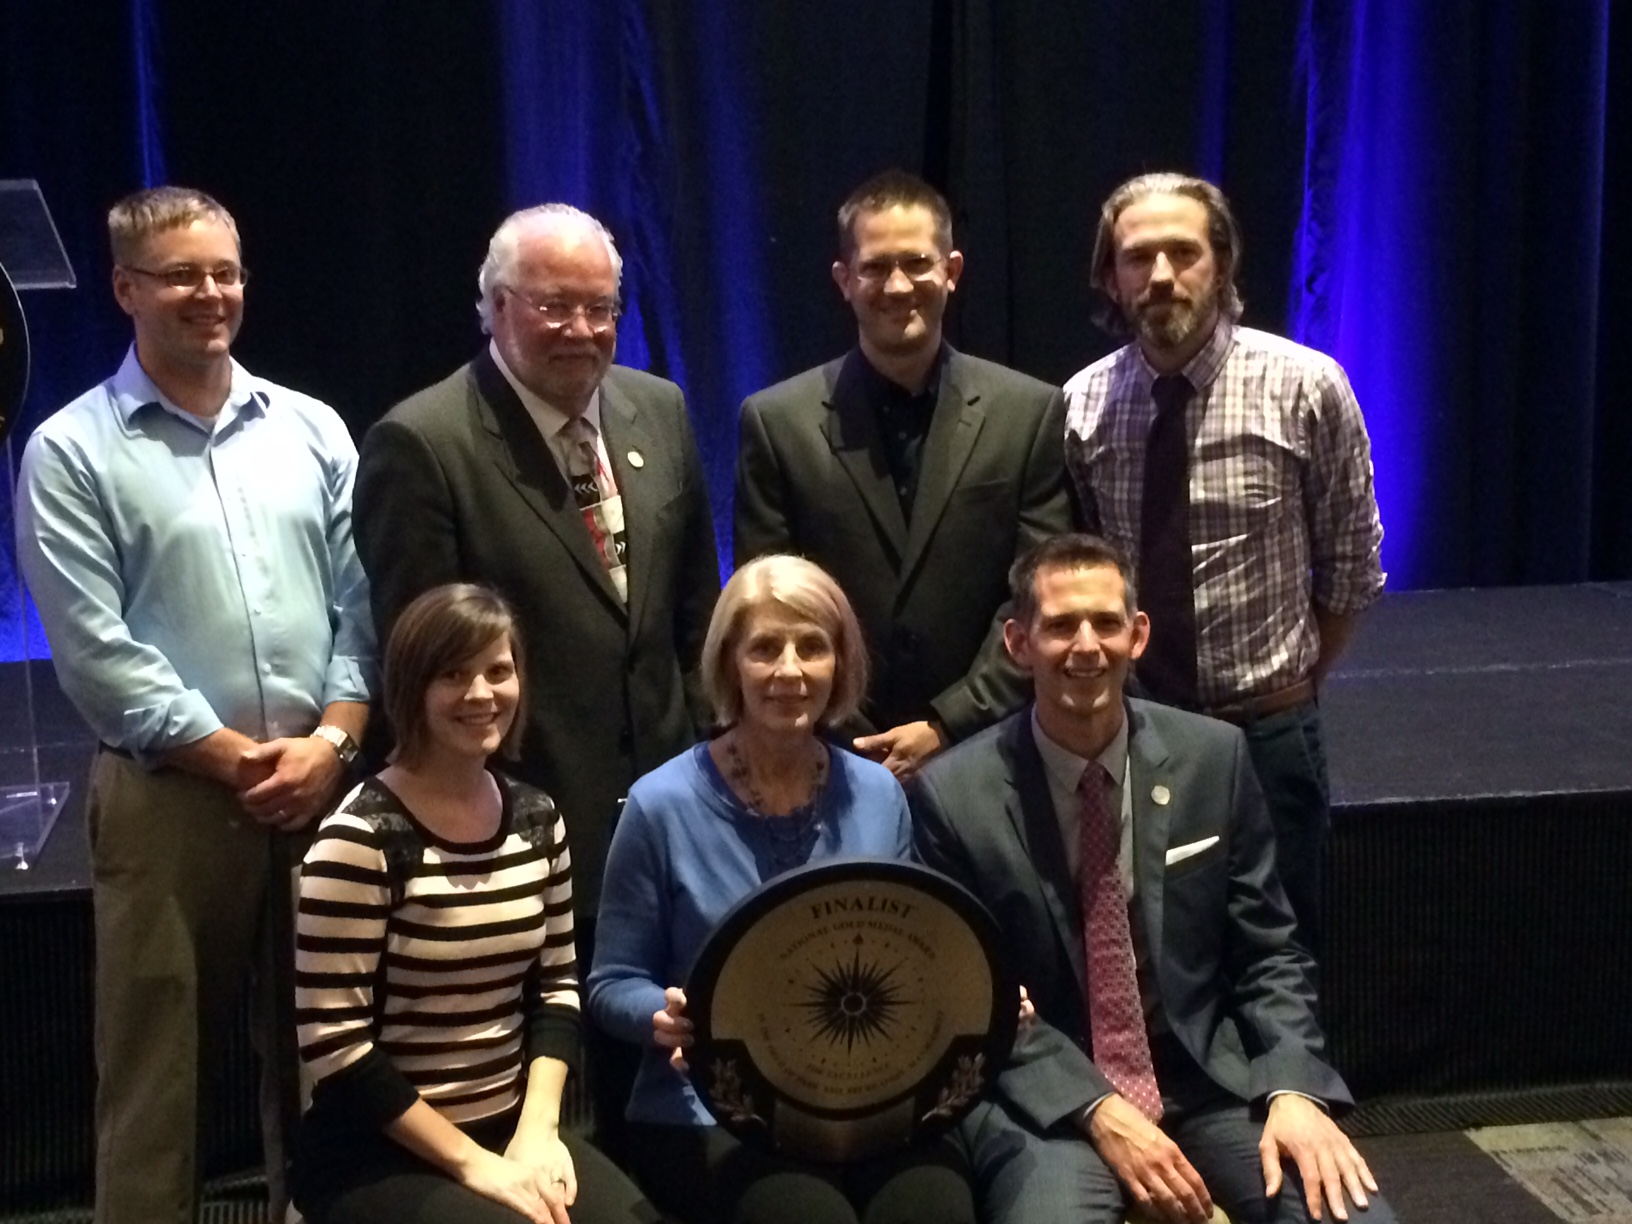 Senior staff members of the Carmel Clay Parks & Recreation department hold their gold medal. The group was in North Carolina this week to attend the 2014 National Recreation and Park Association Congress. (Submitted photo)